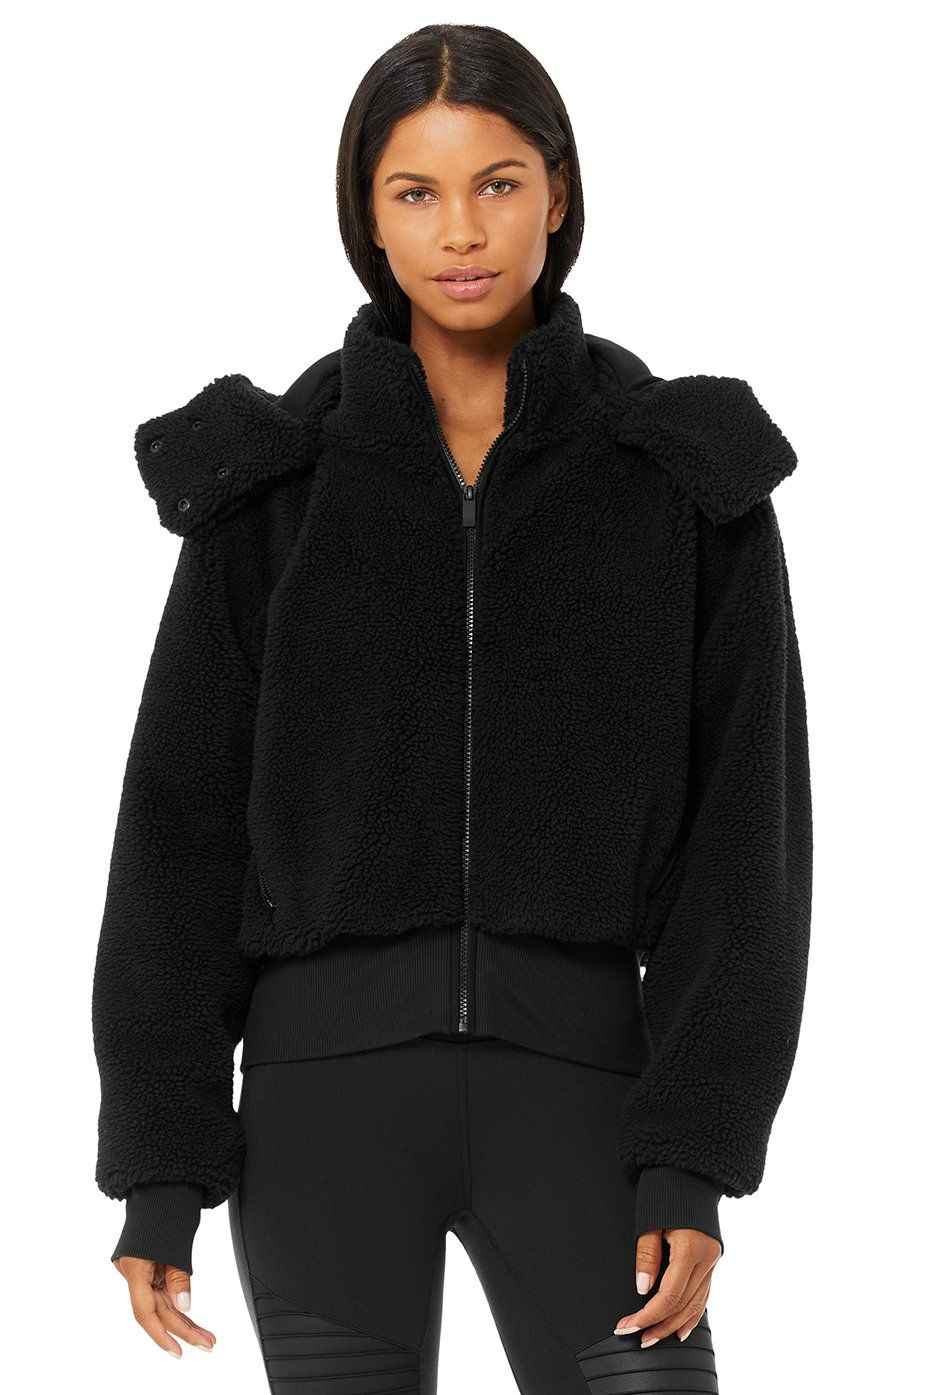 Alo Yoga Women's Mixed Media Pullover Transitional Jacket, Black, XS: Buy  Online at Best Price in Egypt - Souq is now